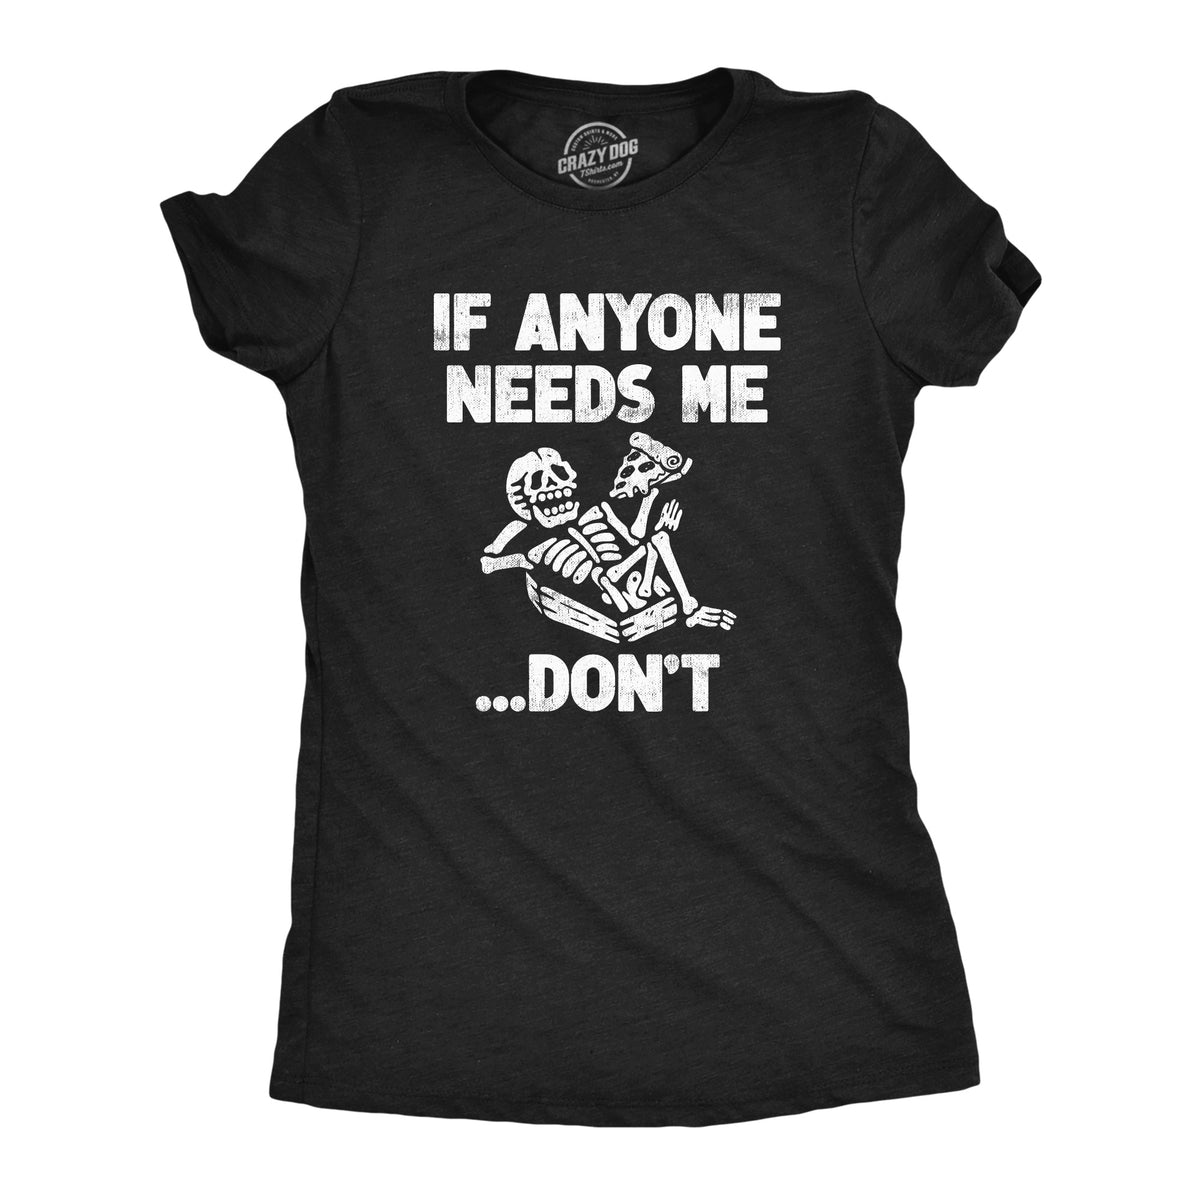 Funny Heather Black - DON’T If Anyone Needs Me Dont Womens T Shirt Nerdy Sarcastic Tee